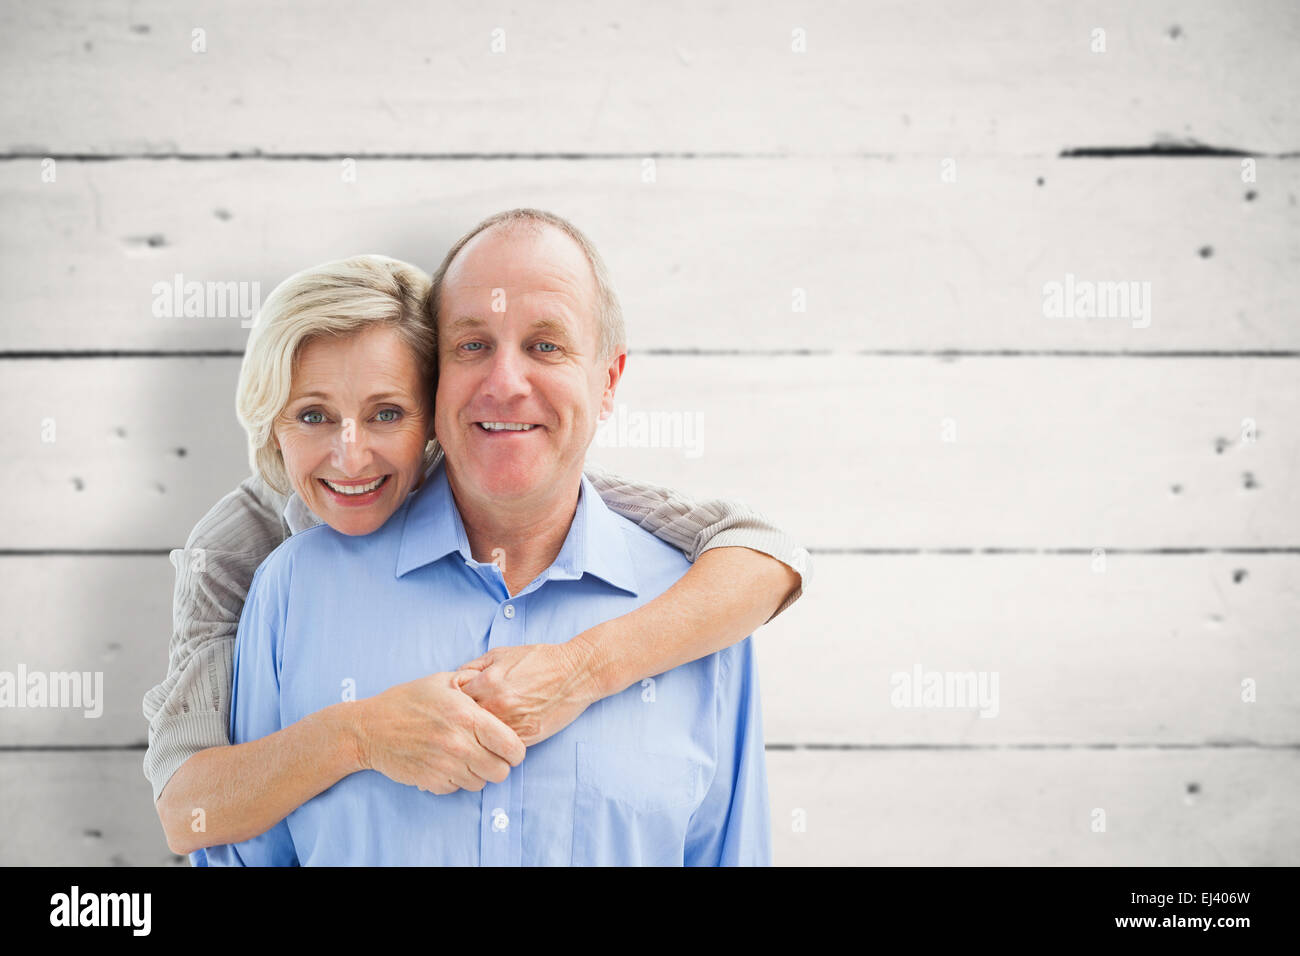 Composite image of happy mature couple smiling at camera Banque D'Images